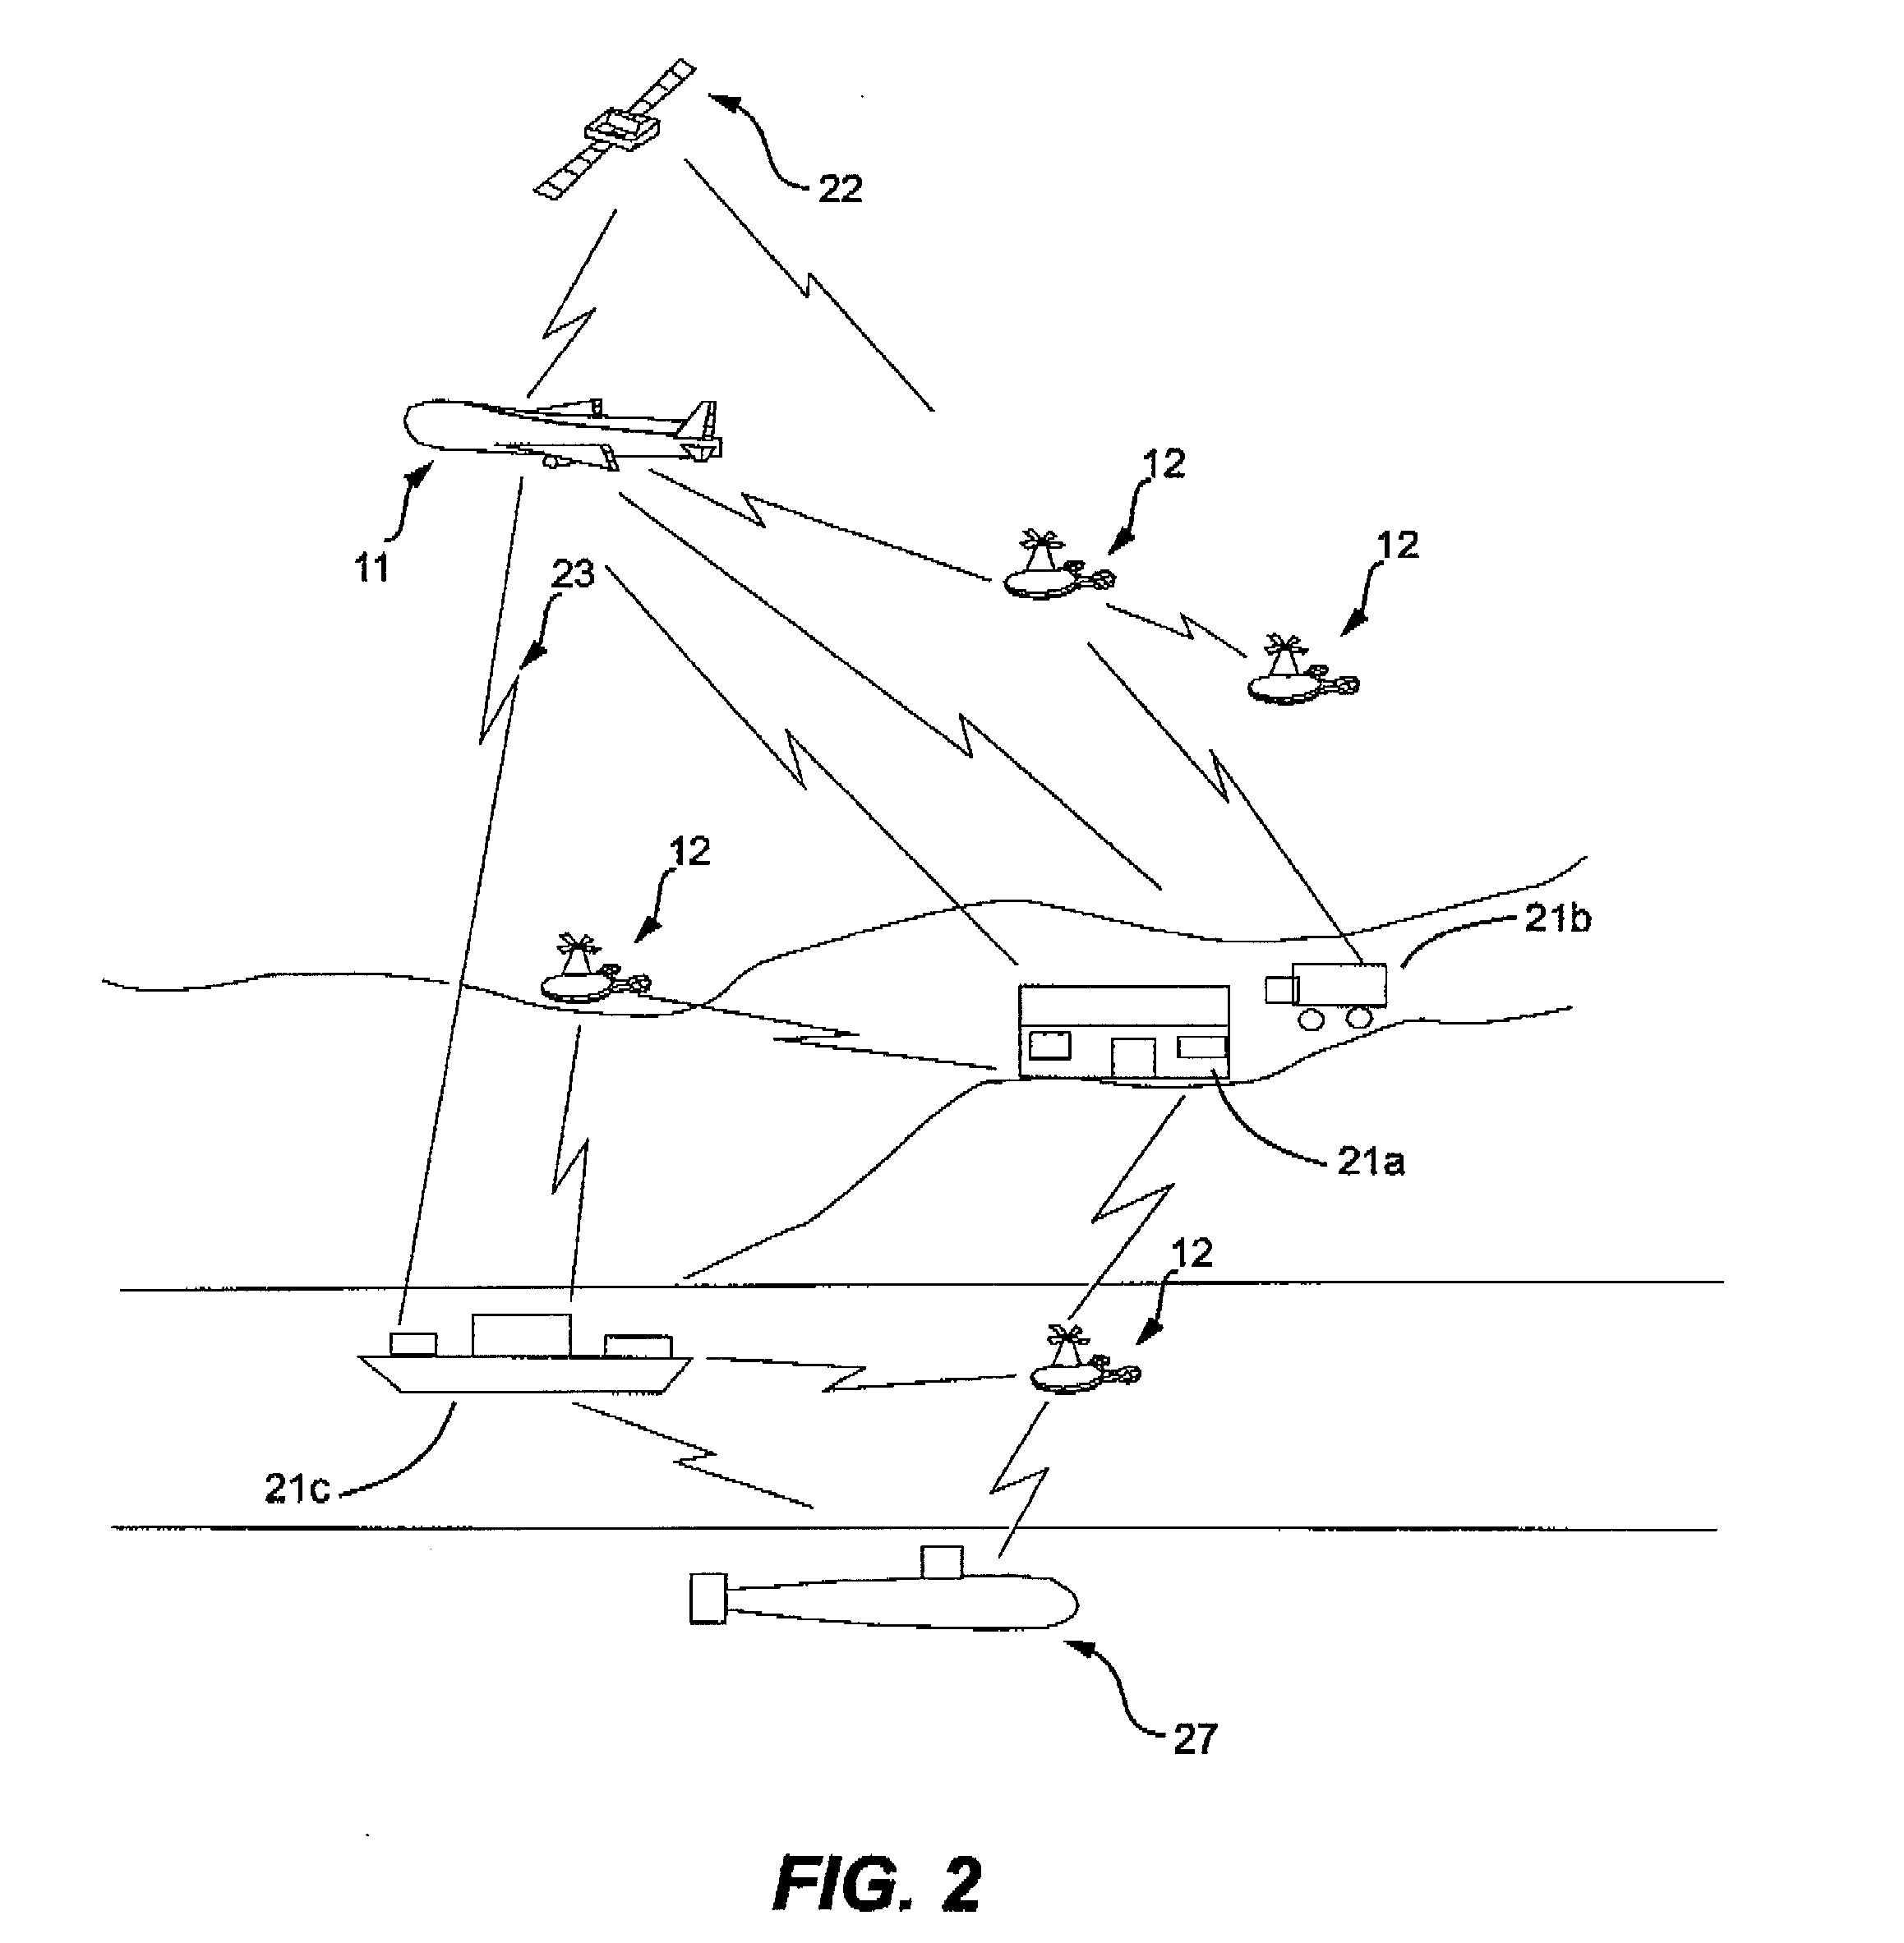 Combination of unmanned aerial vehicles and the method and system to engage in multiple applications